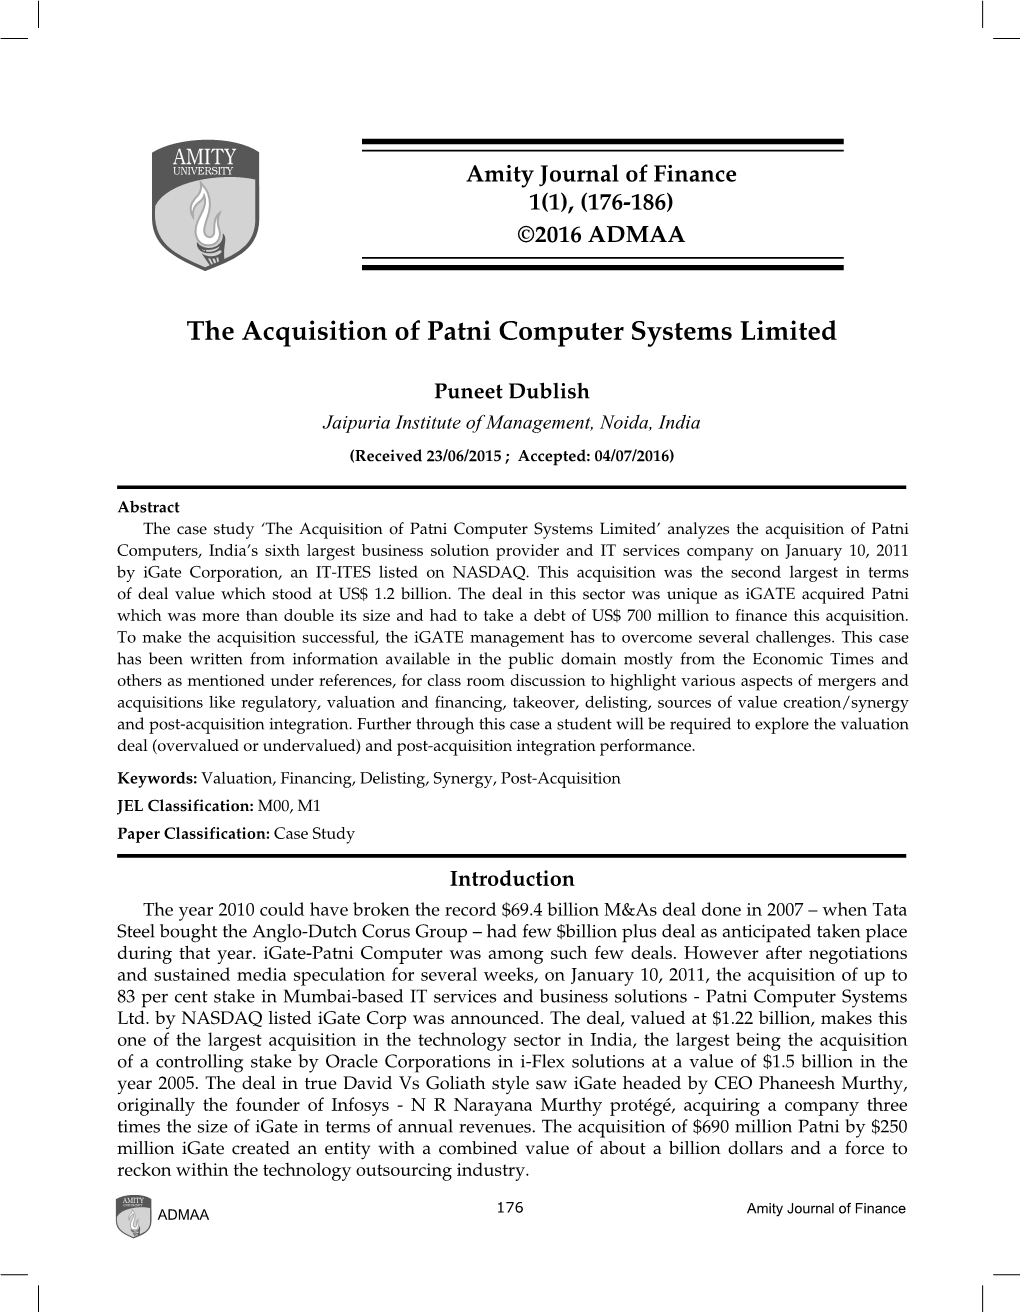 The Acquisition of Patni Computer Systems Limited